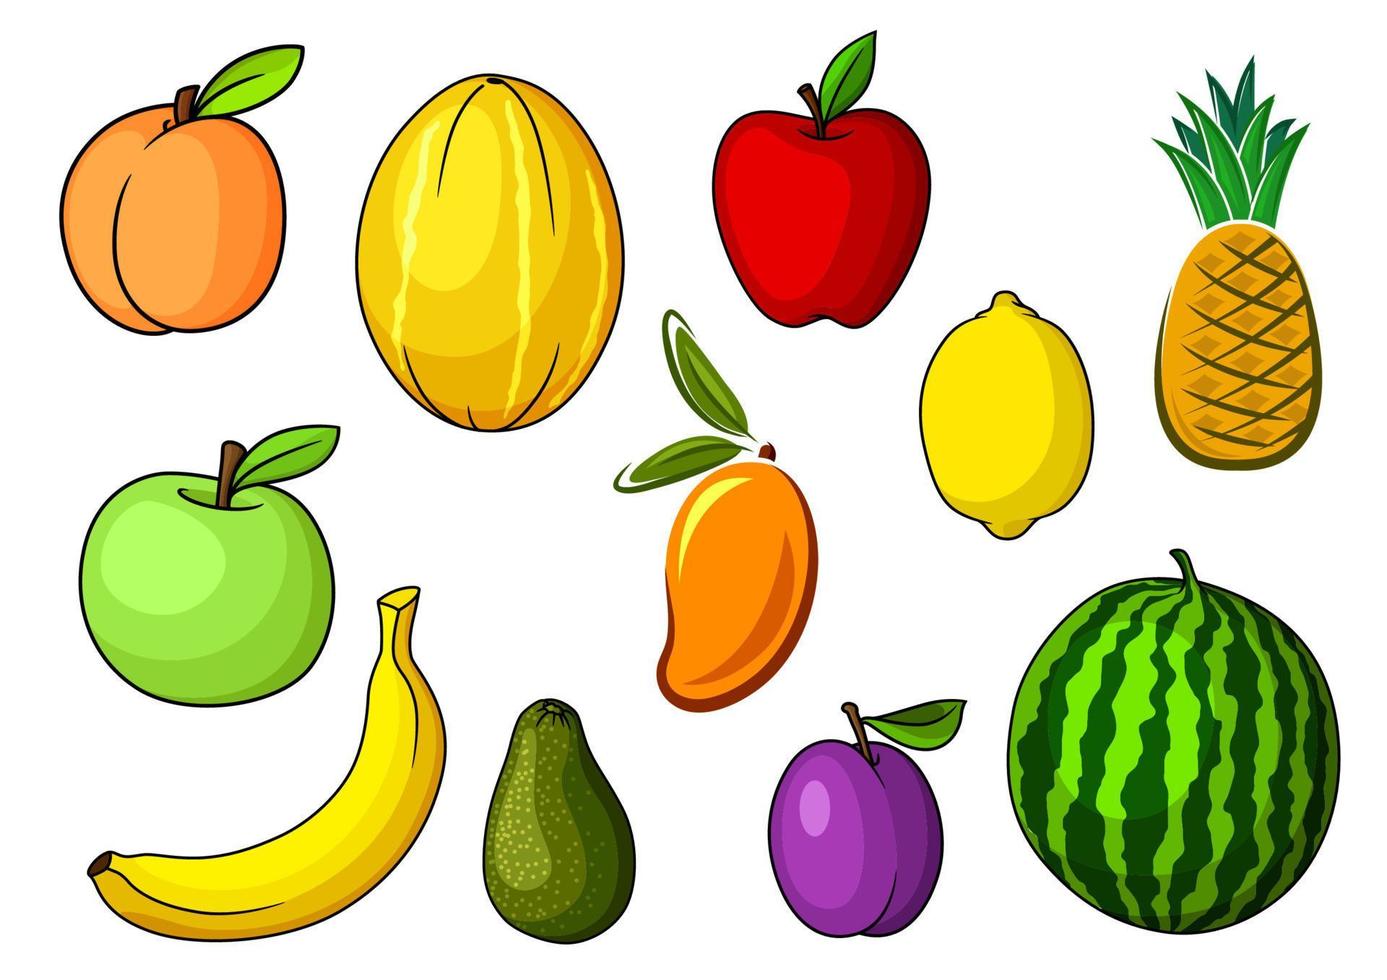 Farm colorful sweet fruits in cartoon style vector